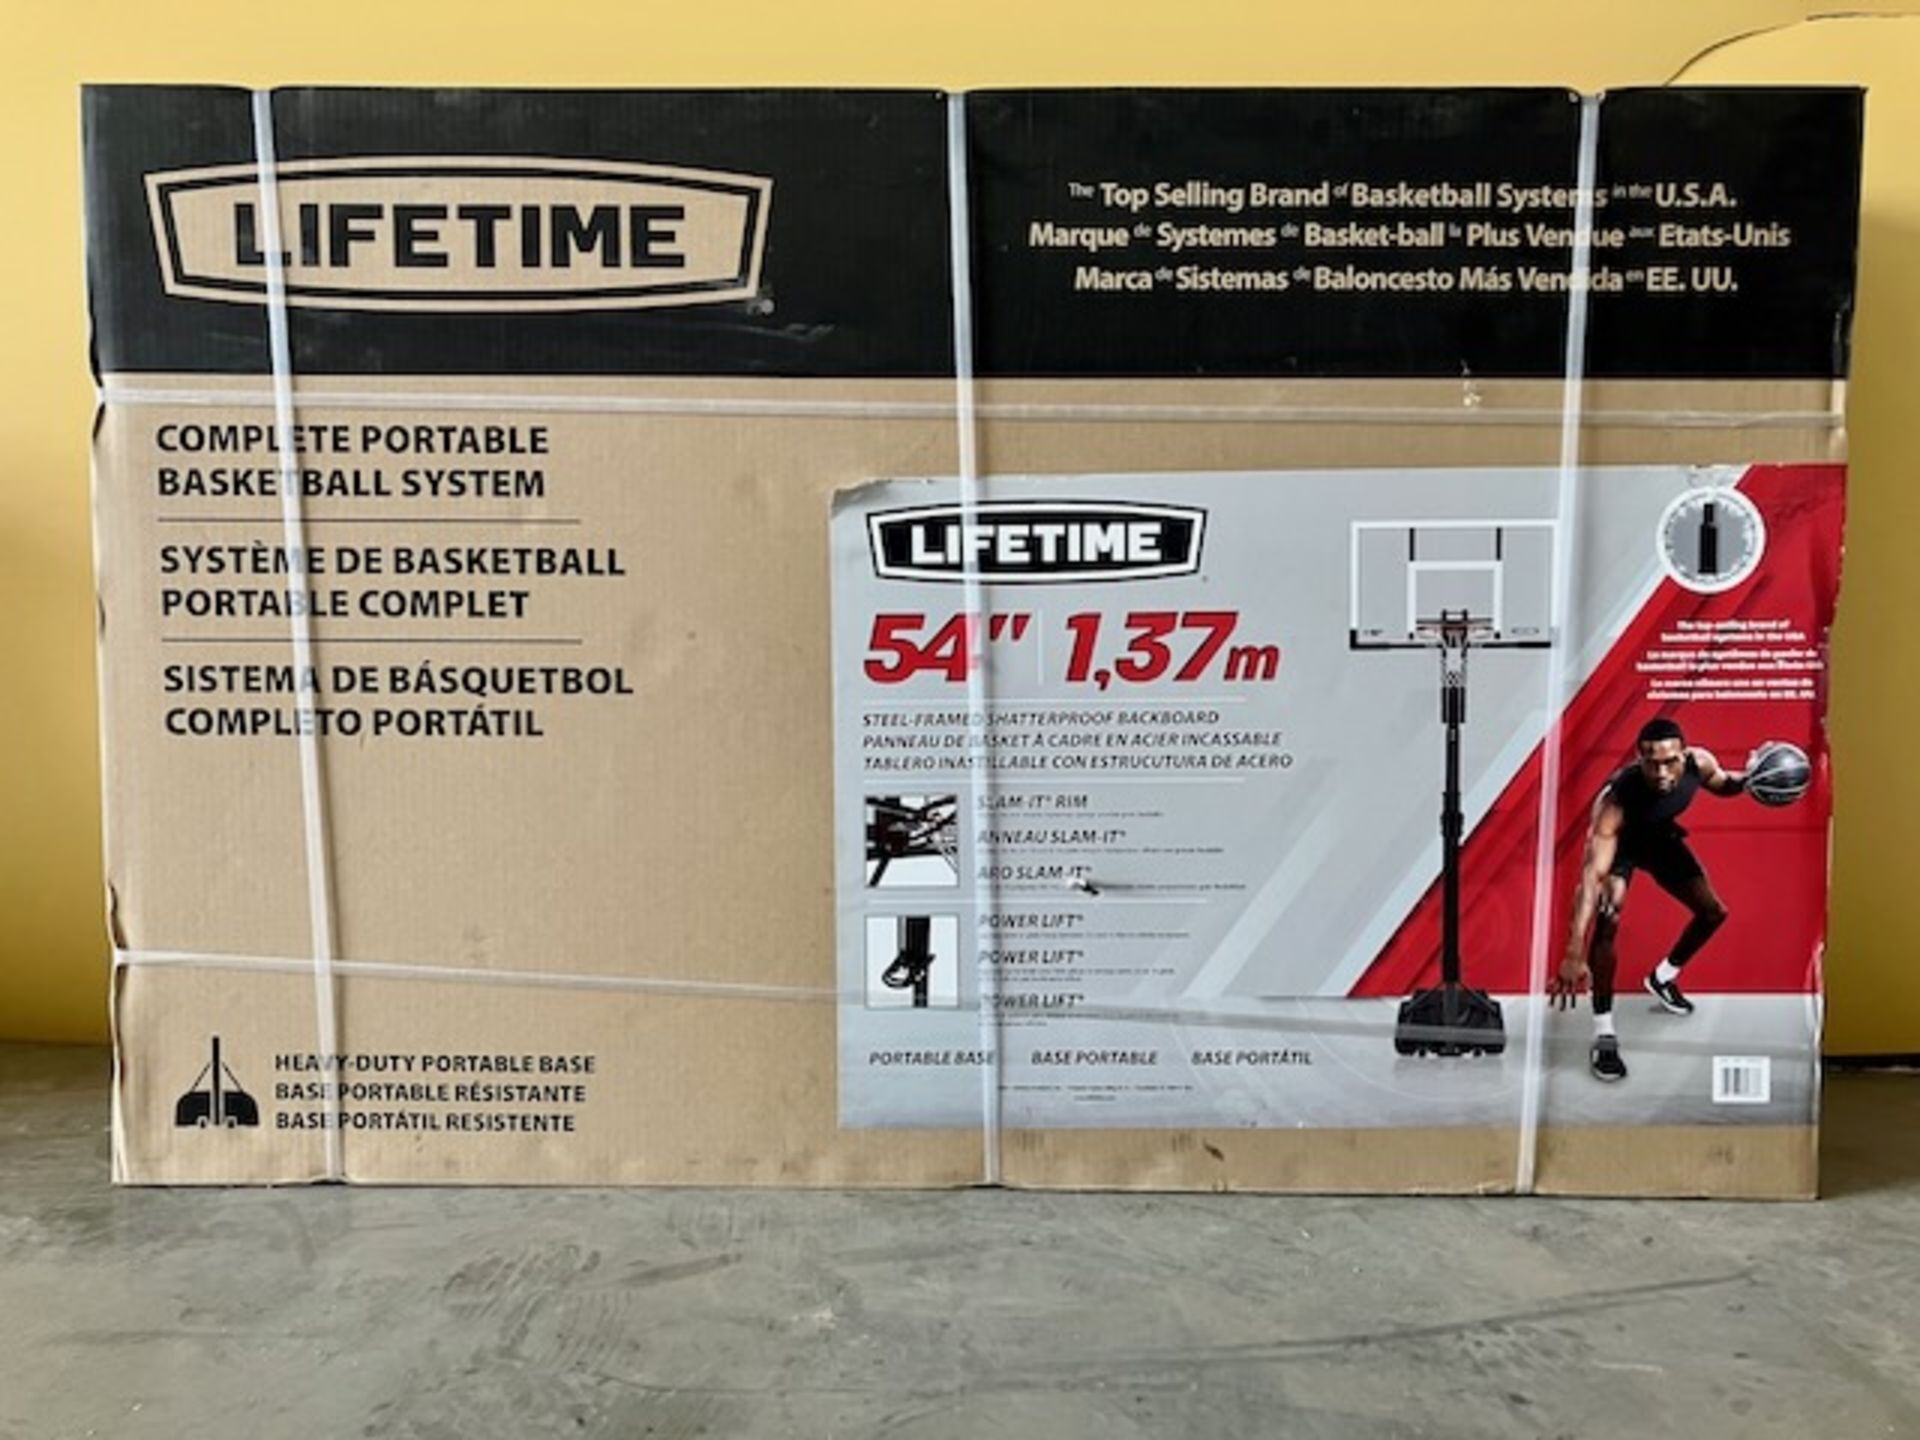 LIFETIME COMPLETE PORTABLE 54" BASKETBALL SYSTEM